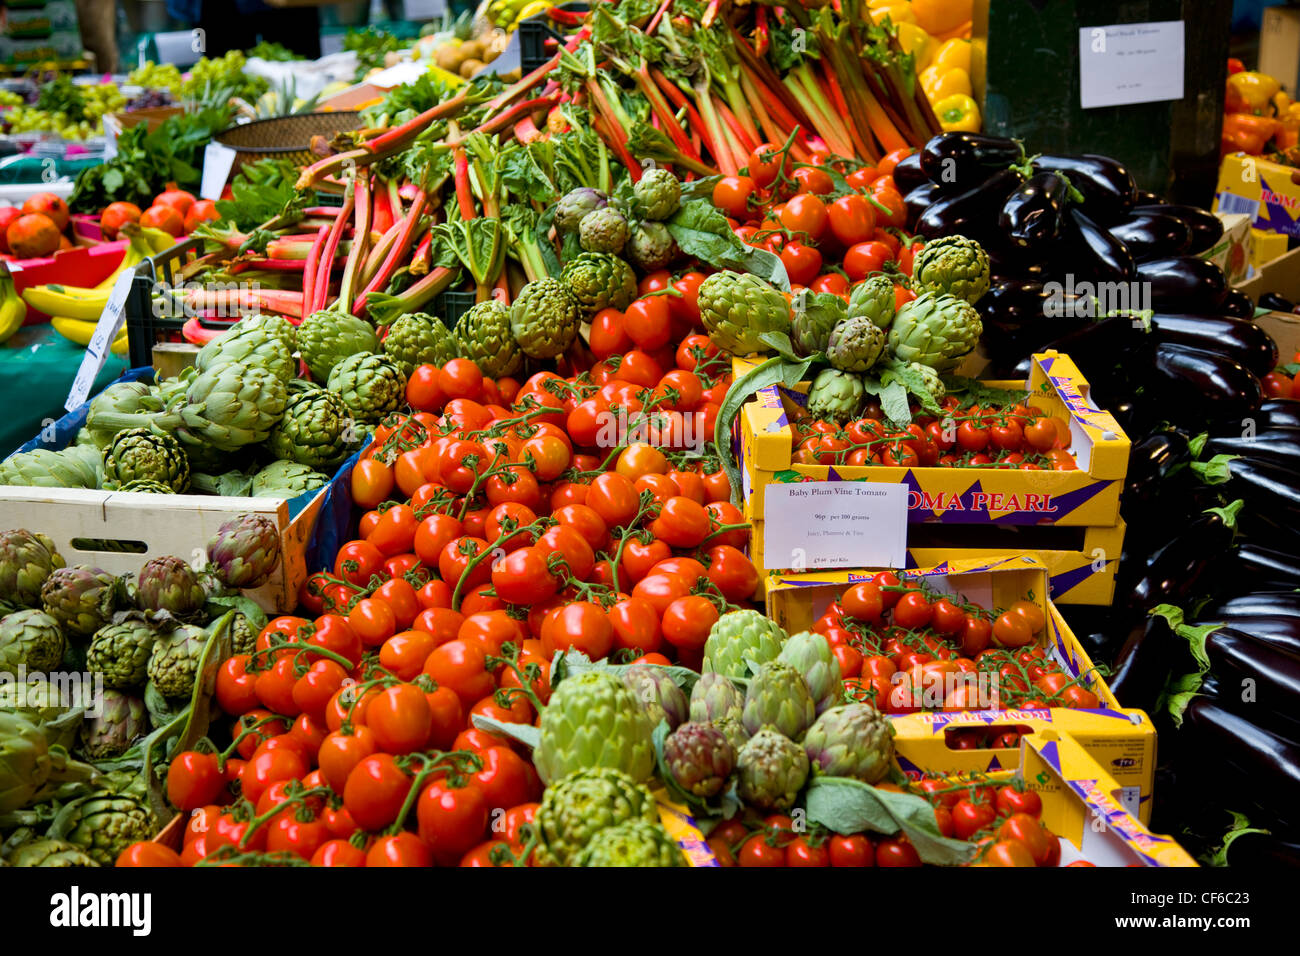 A fruit and vegetable stall at Borough Market in London. Stock Photo